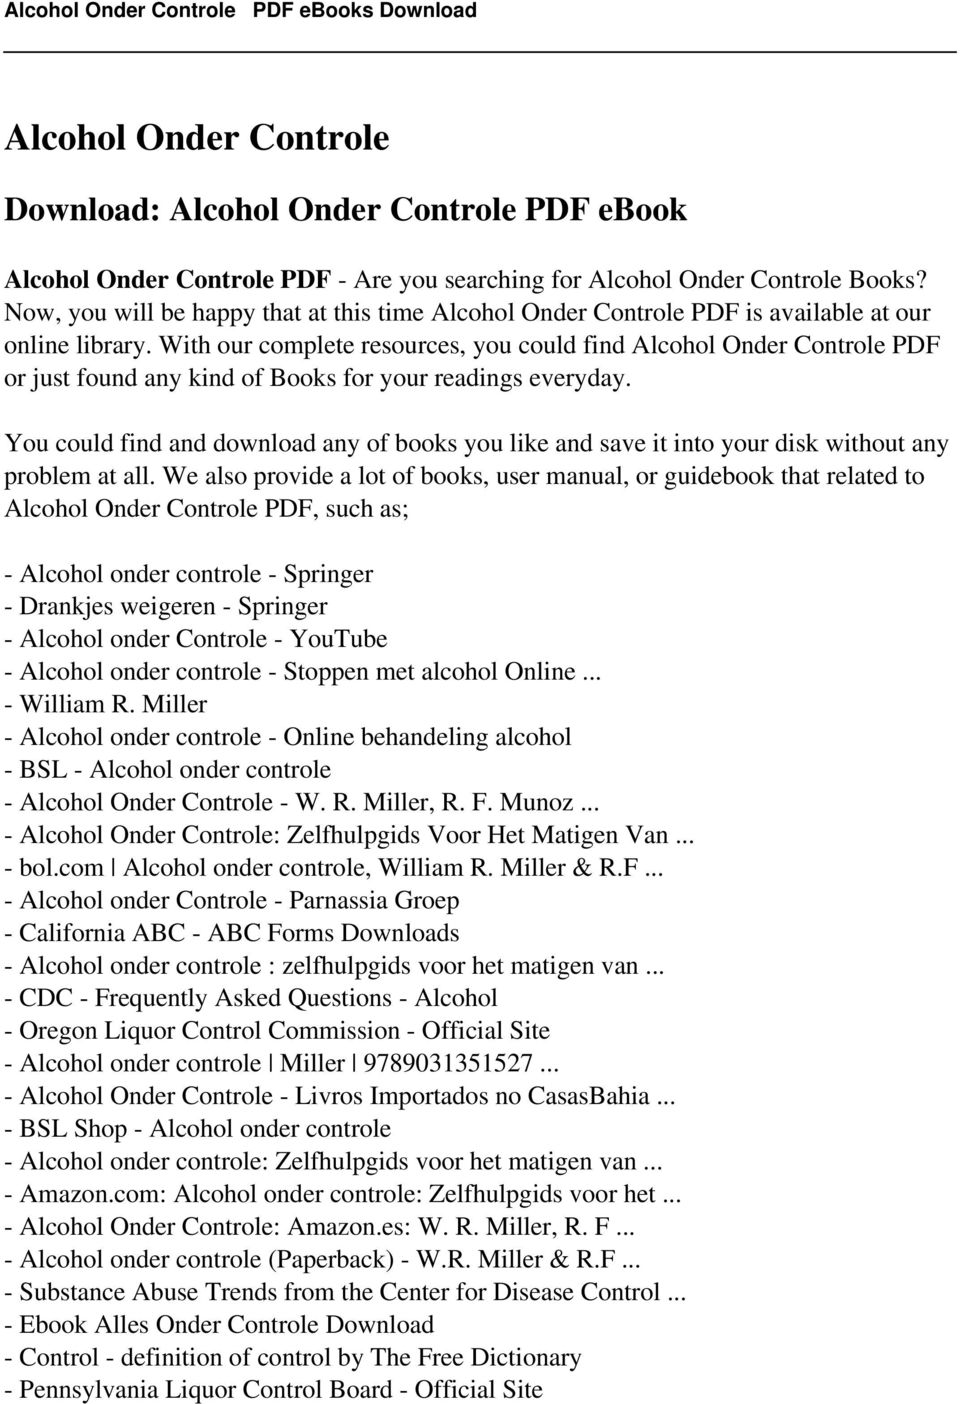 With our complete resources, you could find Alcohol Onder Controle PDF or just found any kind of Books for your readings everyday.